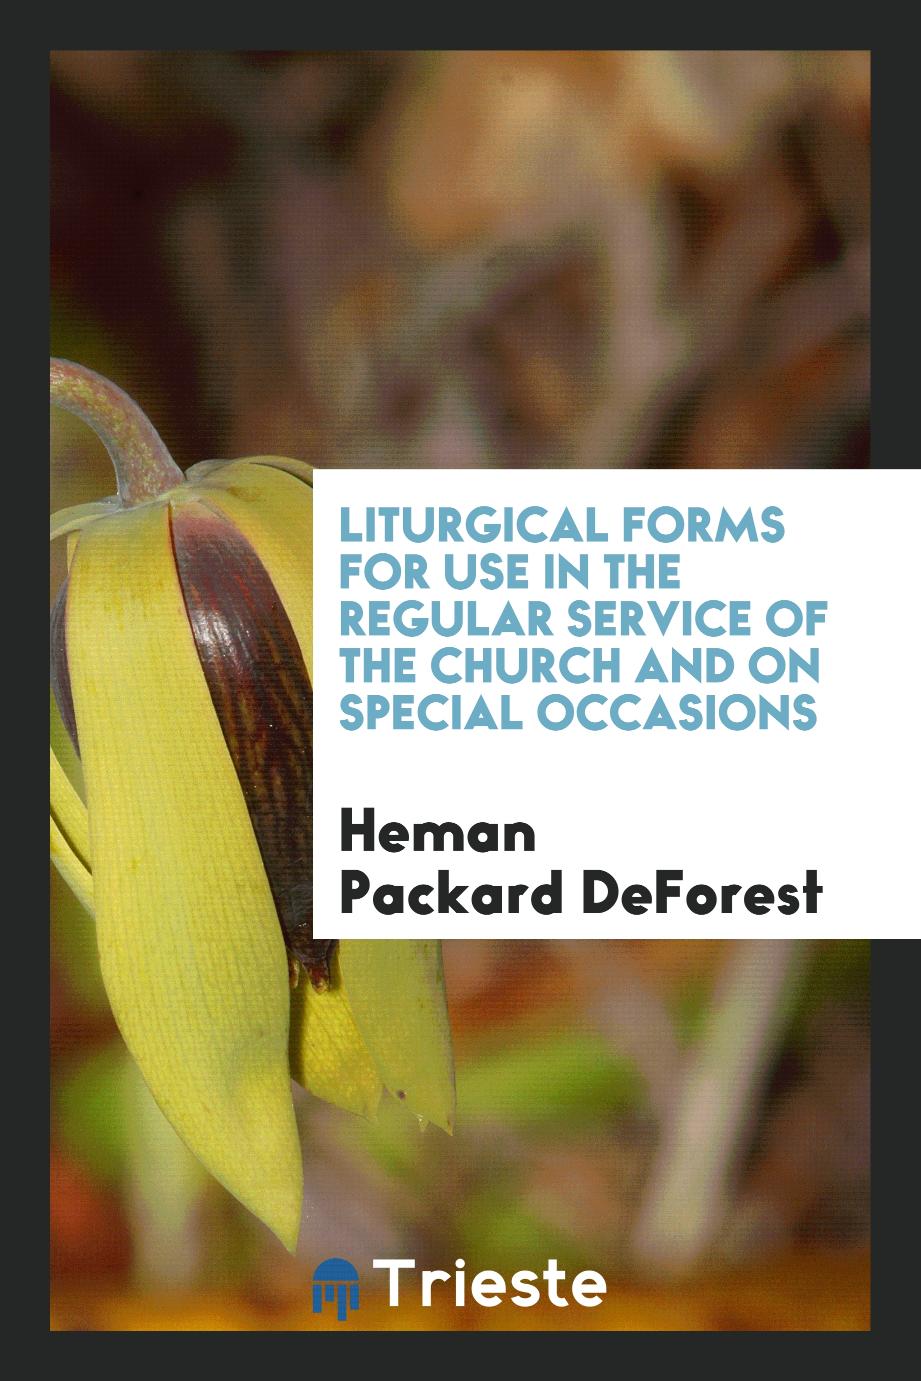 Liturgical Forms for Use in the Regular Service of the Church and on Special Occasions